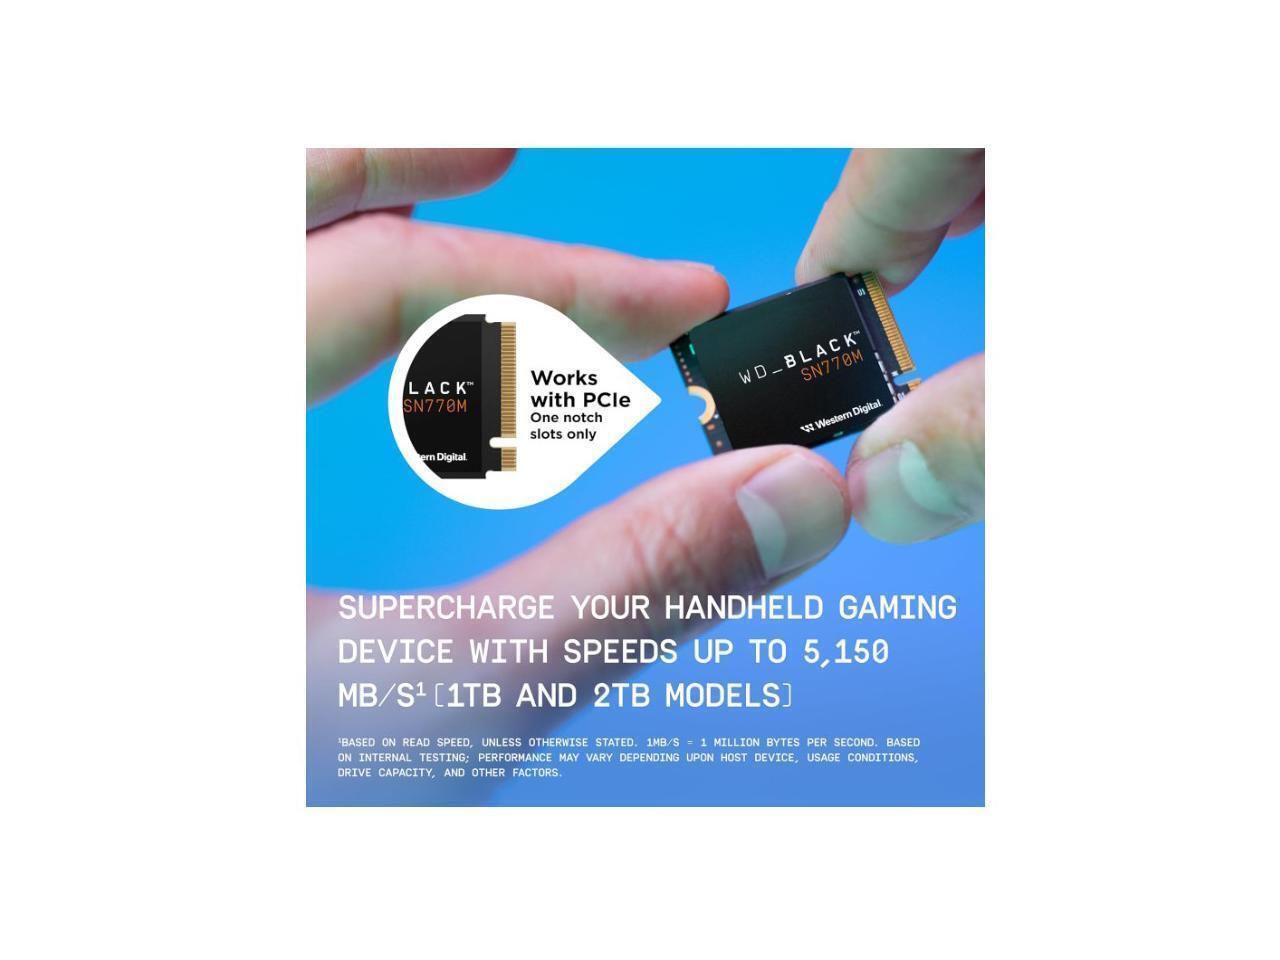 WD_BLACK 500GB SN770M M.2 2230 NVMe SSD for Handheld Gaming Devices